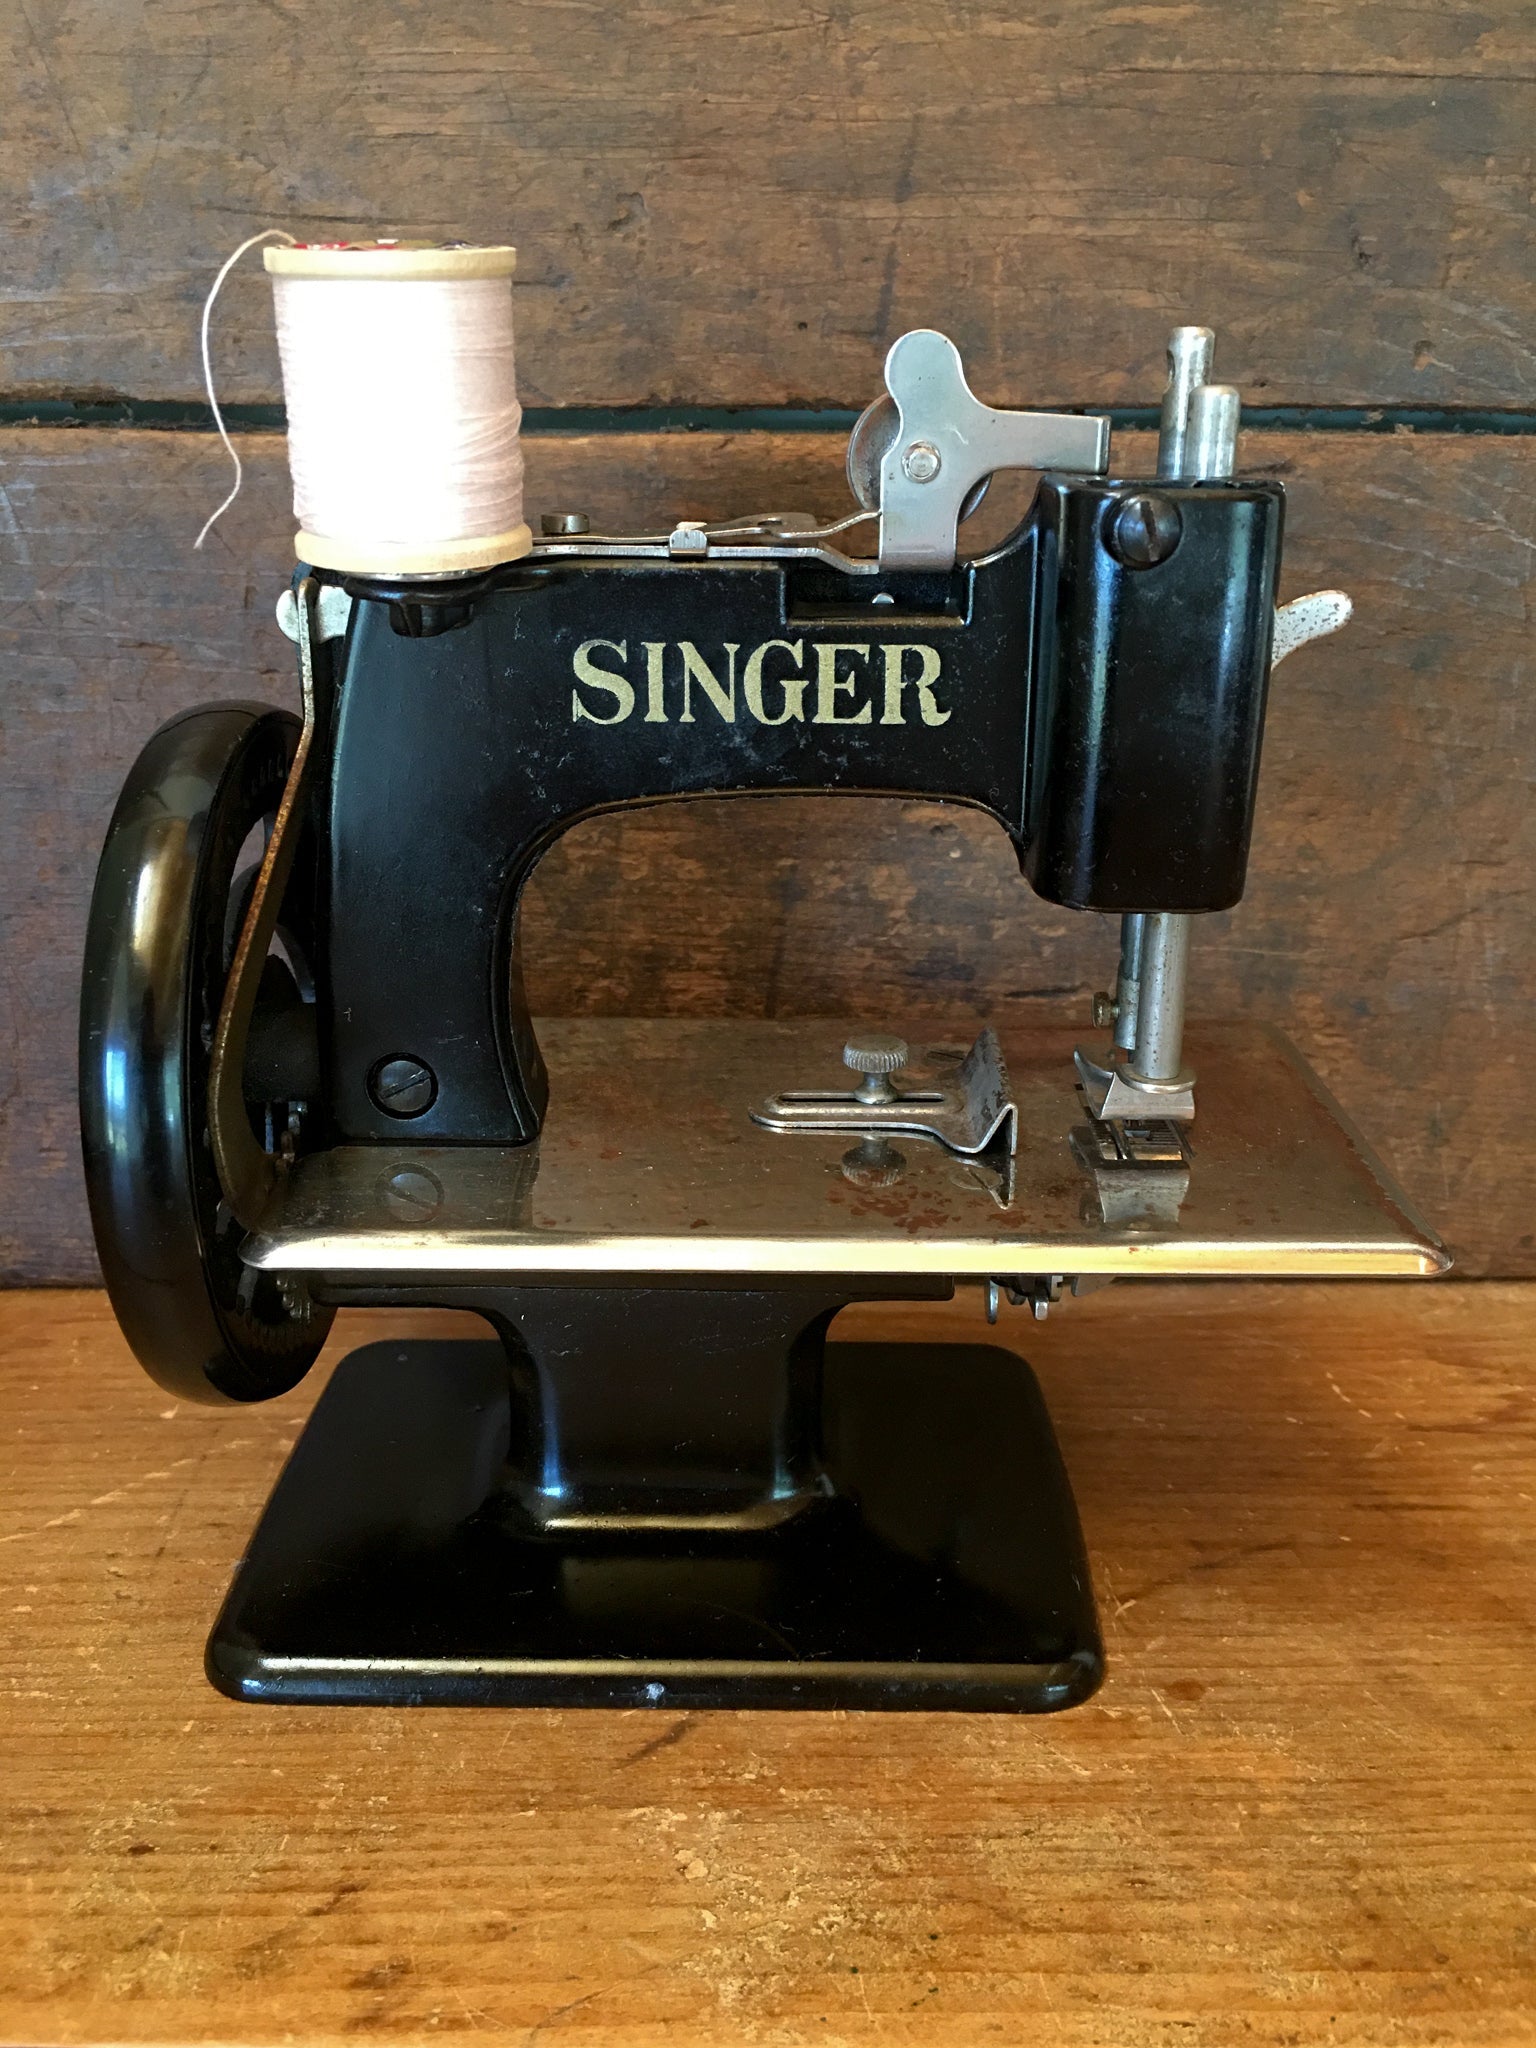 1953 Singer Model 20 Toy Sewing Machine with Instruction Booklet